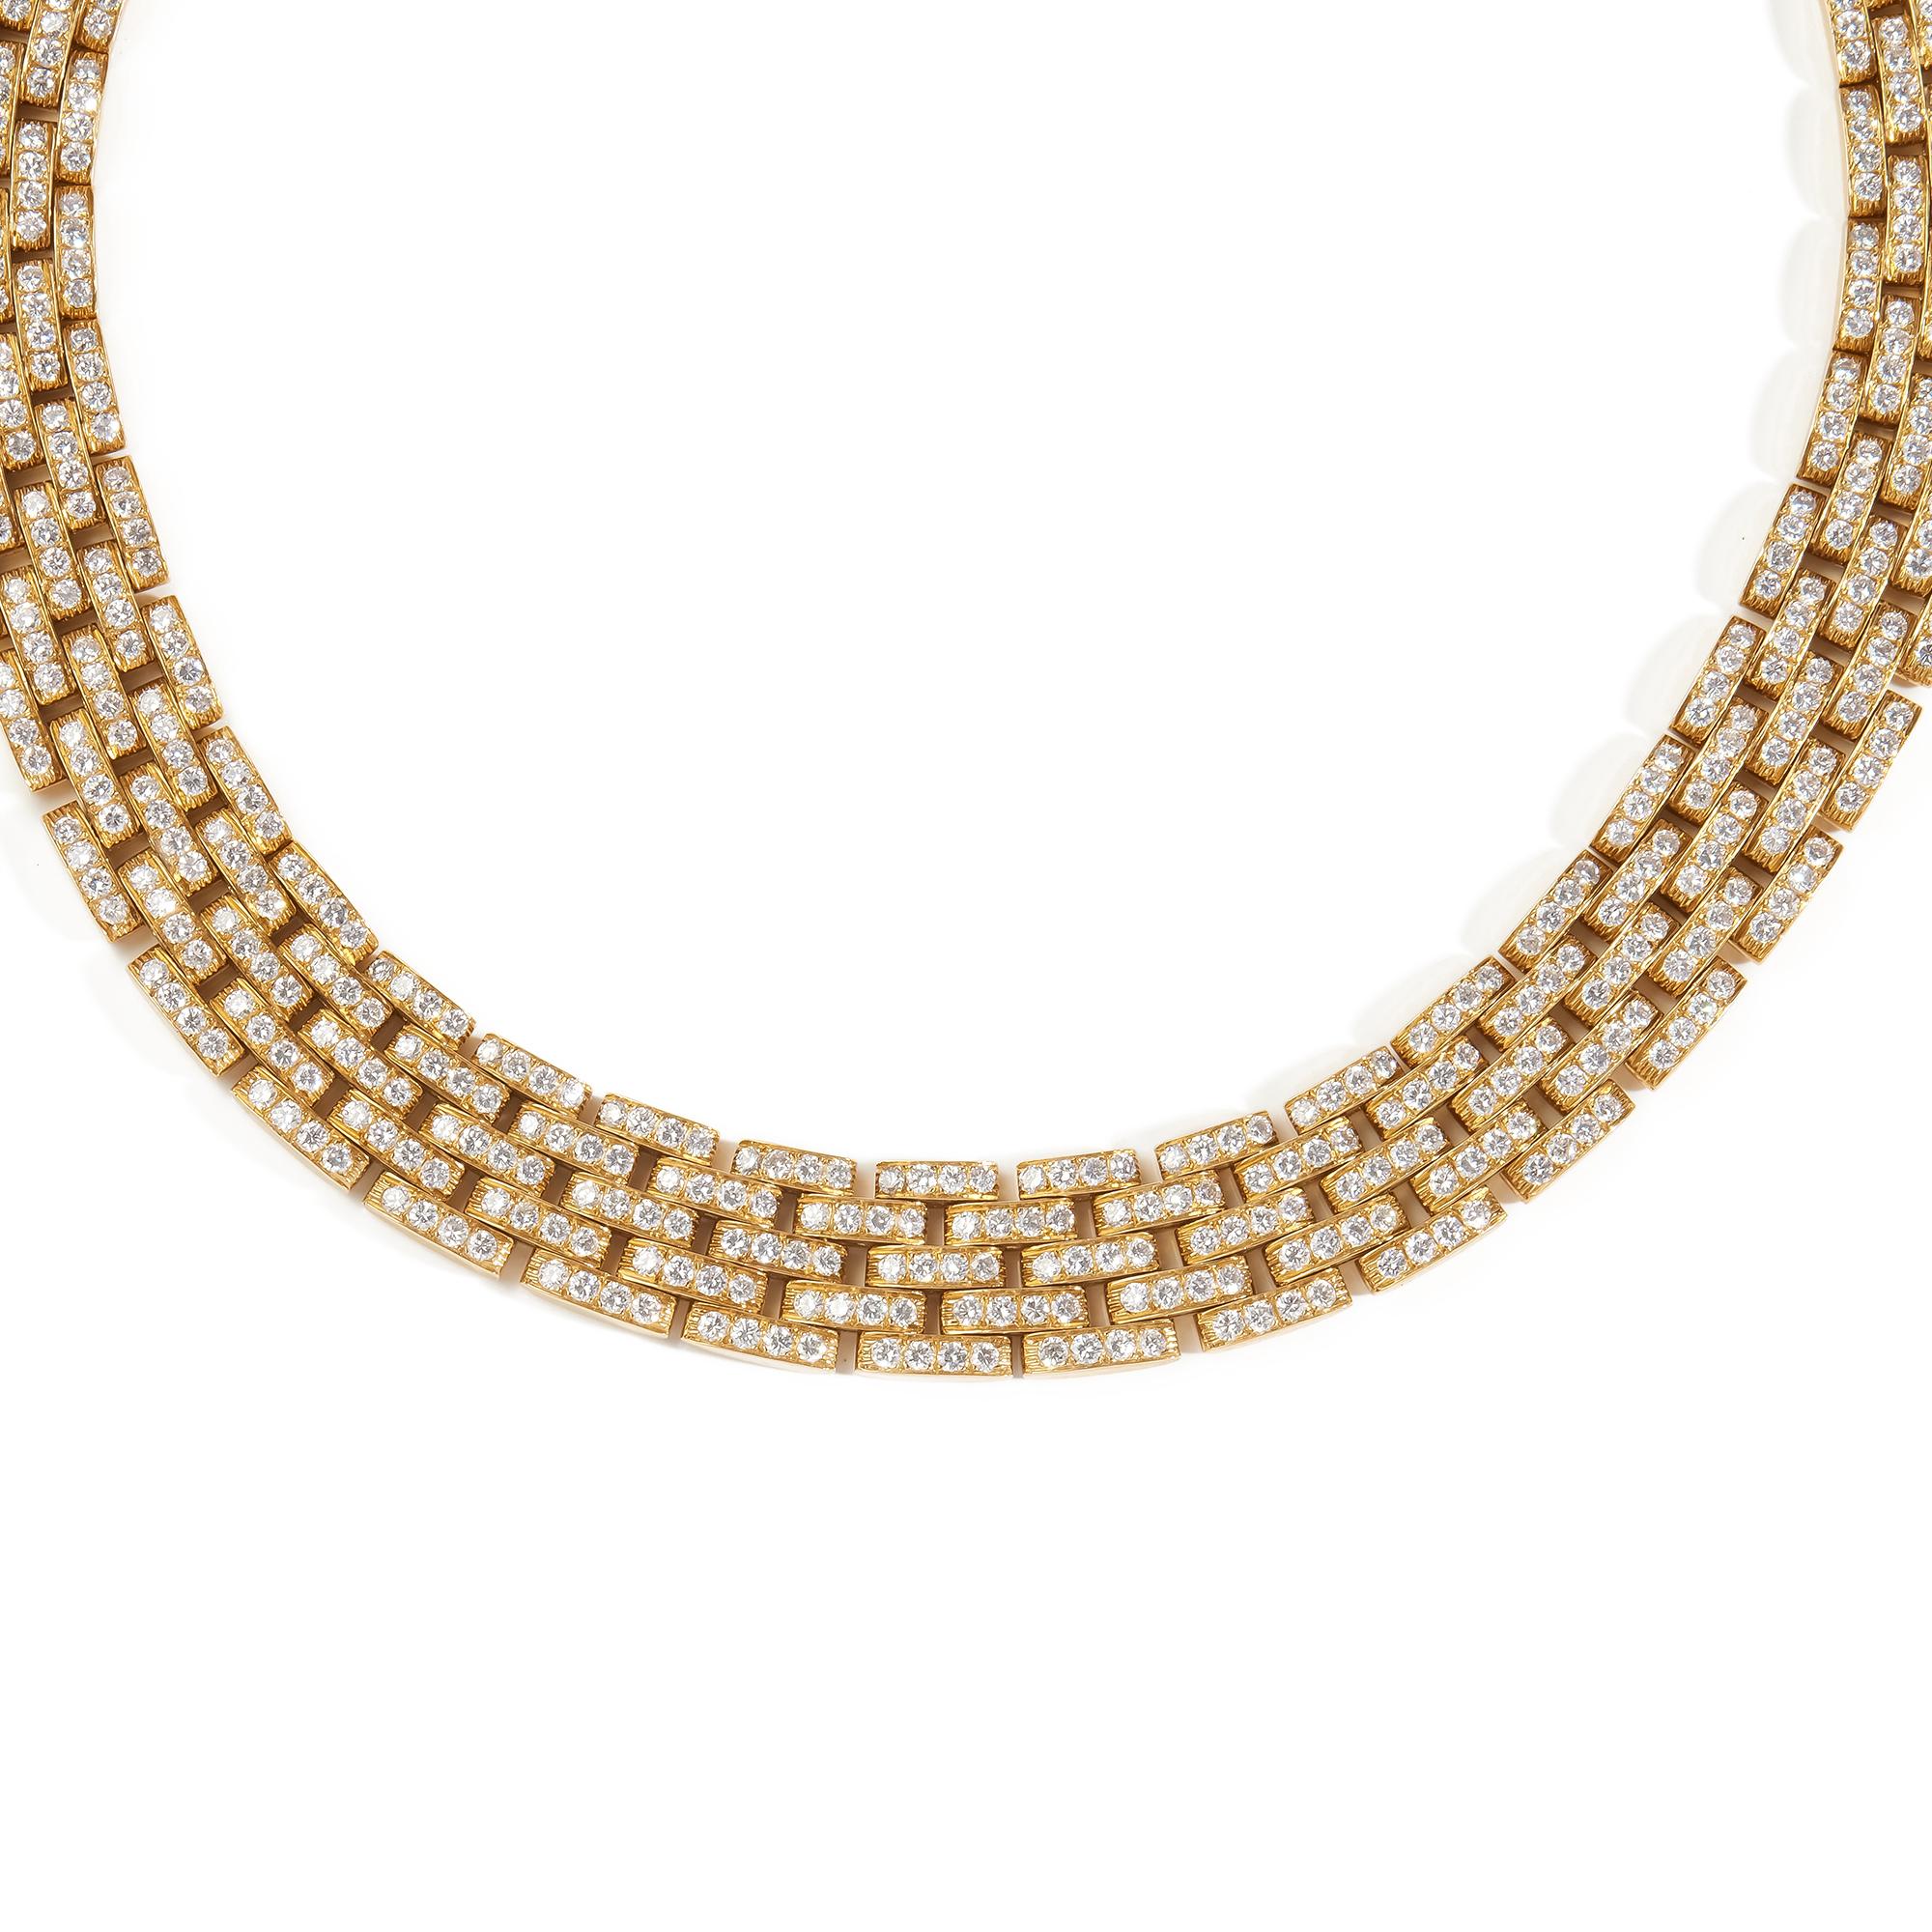 Contemporary Cartier Maillon Panthere 5 Row Diamond Paved Necklace